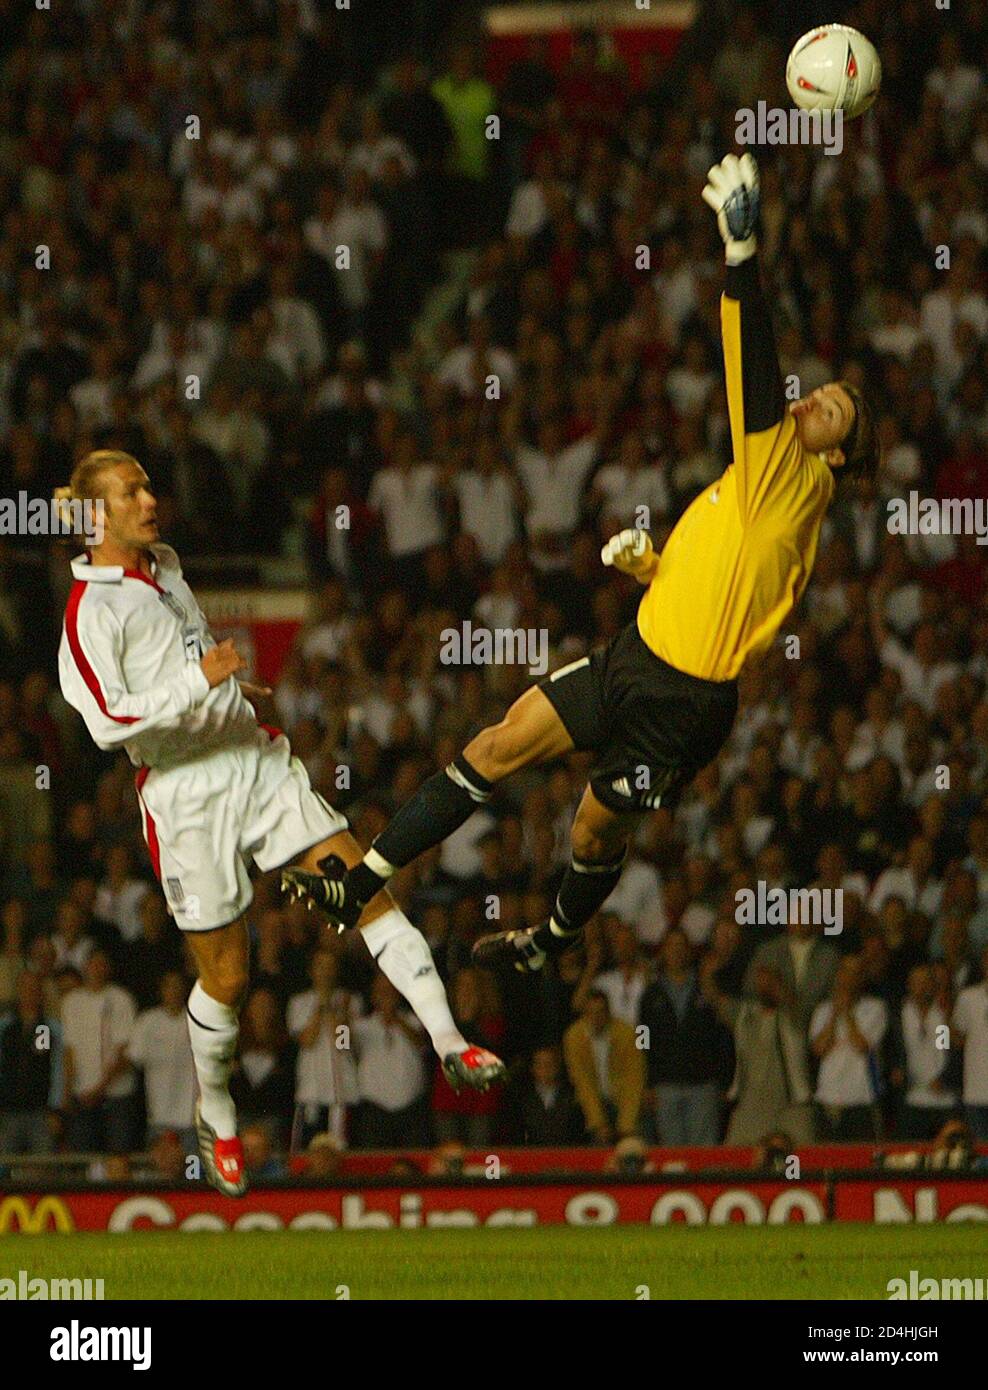 England's David Beckham (L) forces an early save from Liechtenstein's keeper Peter Jehle during their Euro 2004 Championship Group Seven qualifier at Old Trafford, in Manchester September 10, 2003. REUTERS/Ian Hodgson  RUS/AA Stock Photo